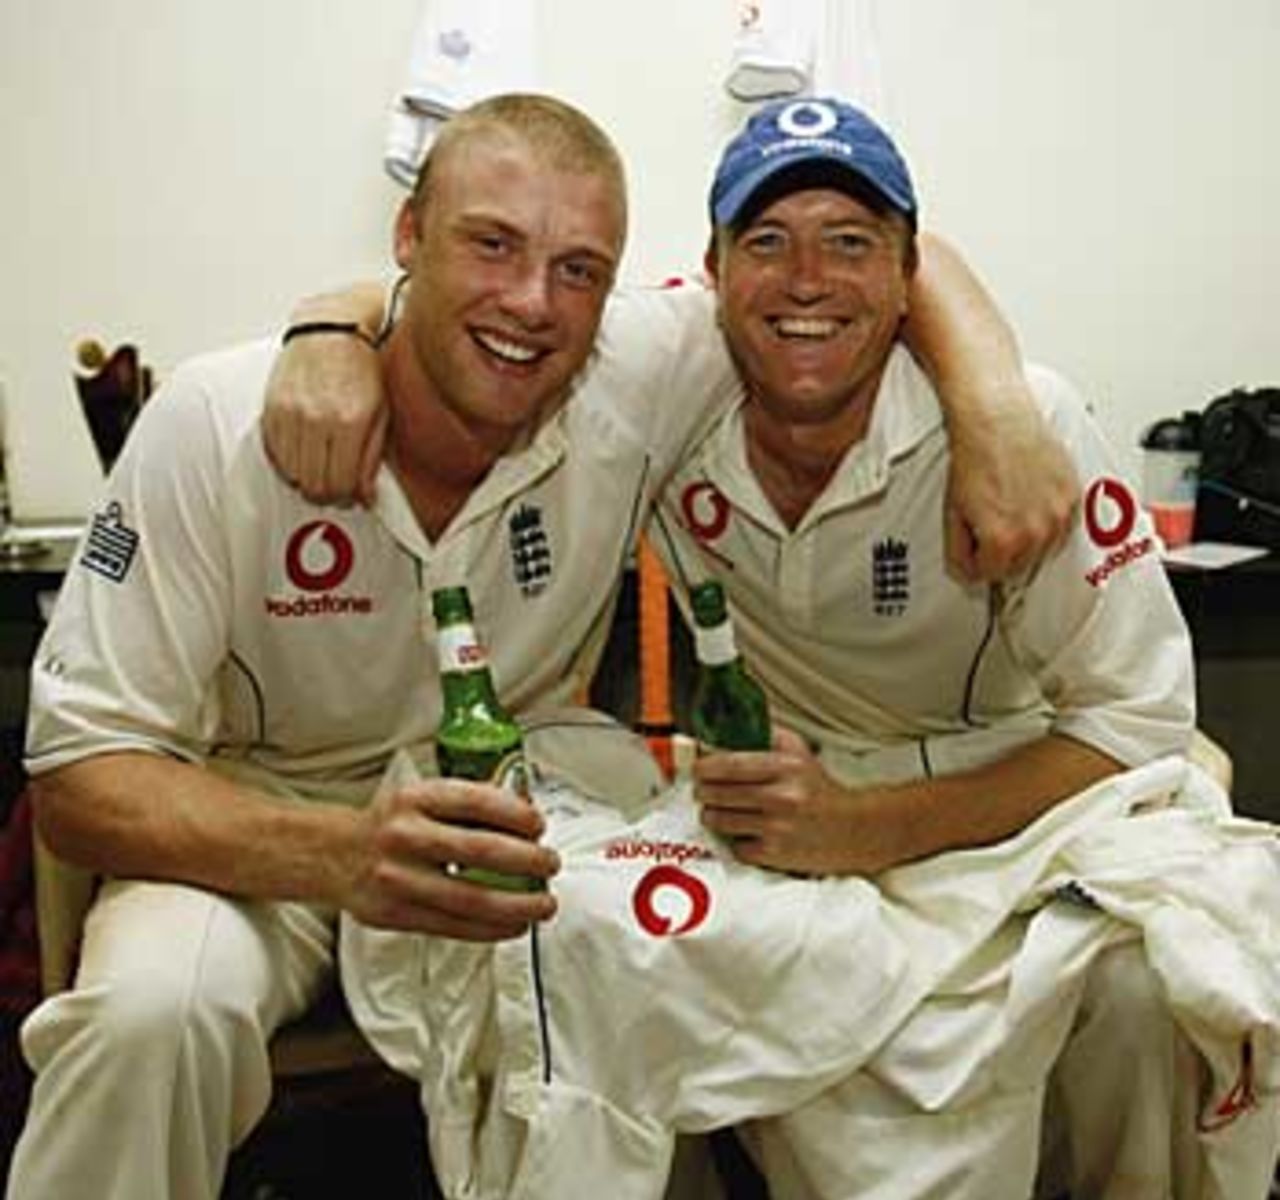 The smile says it all: Andrew Flintoff and Shaun Udal relax after their win, India v England, 3rd Test, Mumbai, March 22, 2006